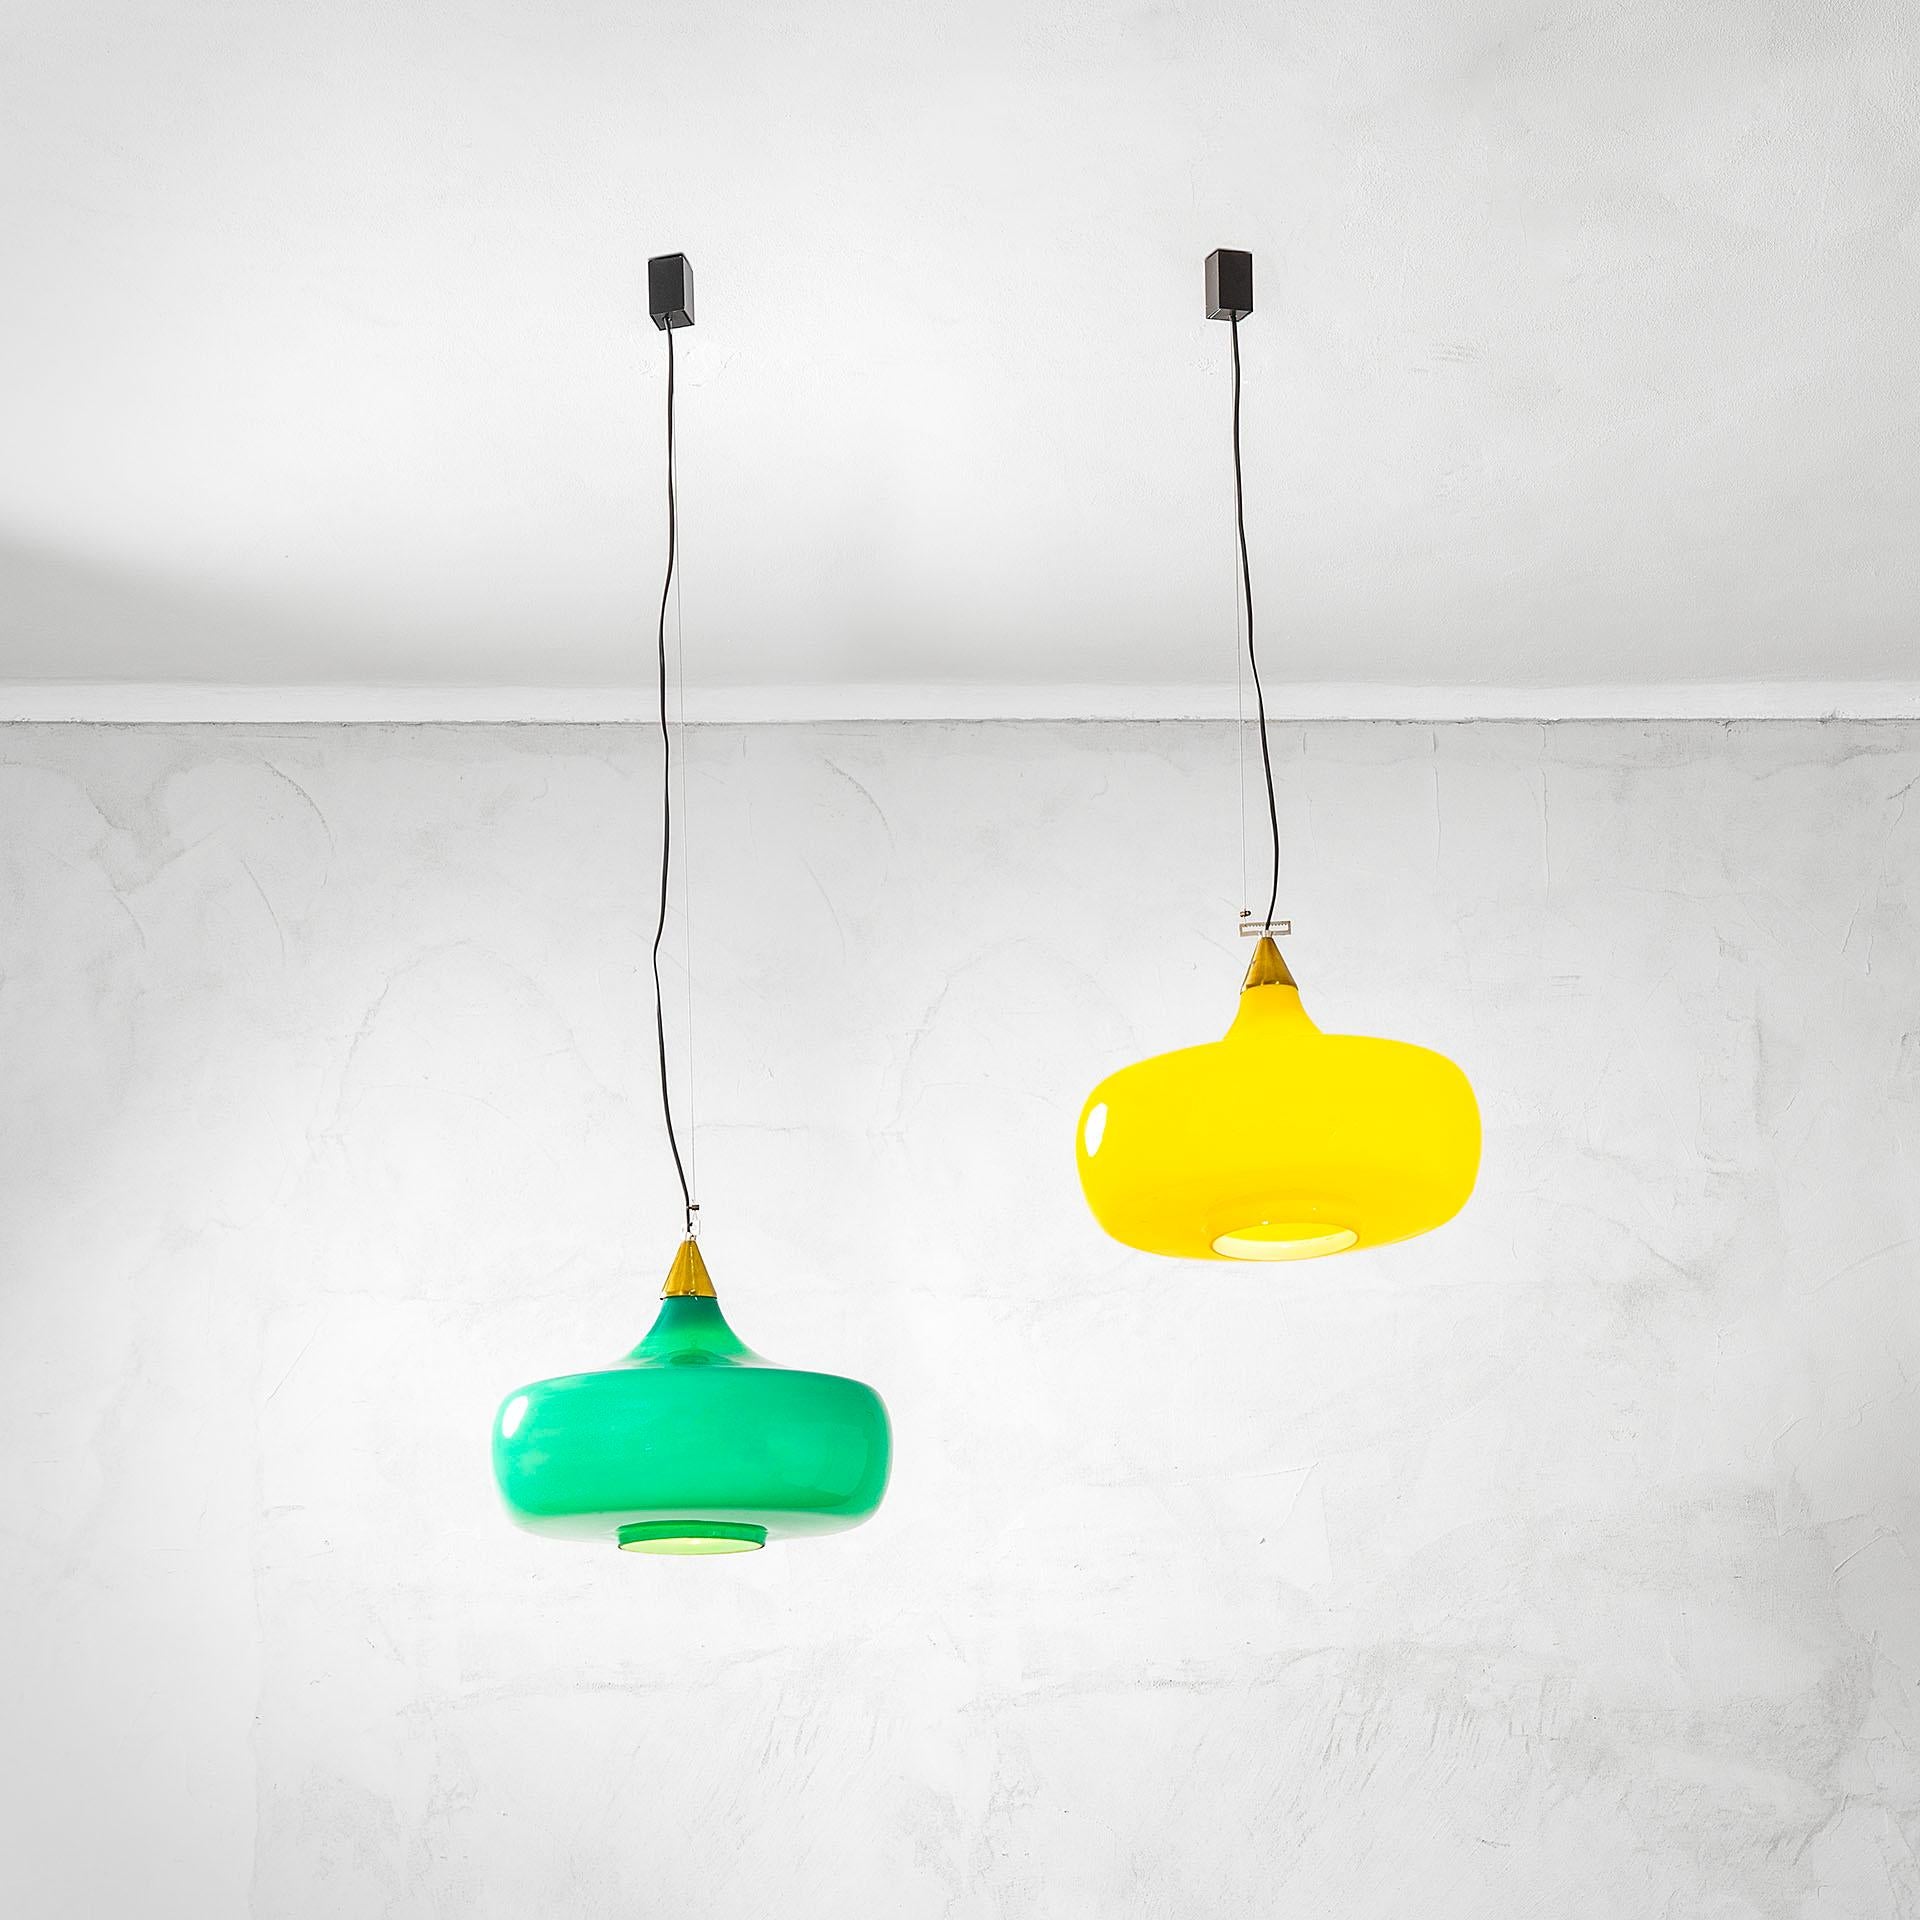 Alessandro Pianon  (1931-1964) studied architecture at the University of Venice and in 1956 started working for Vistosi, designing its brand. In 1962 Alessandro opened his own design studio.

Here we have a pair of hanging lamps designed by